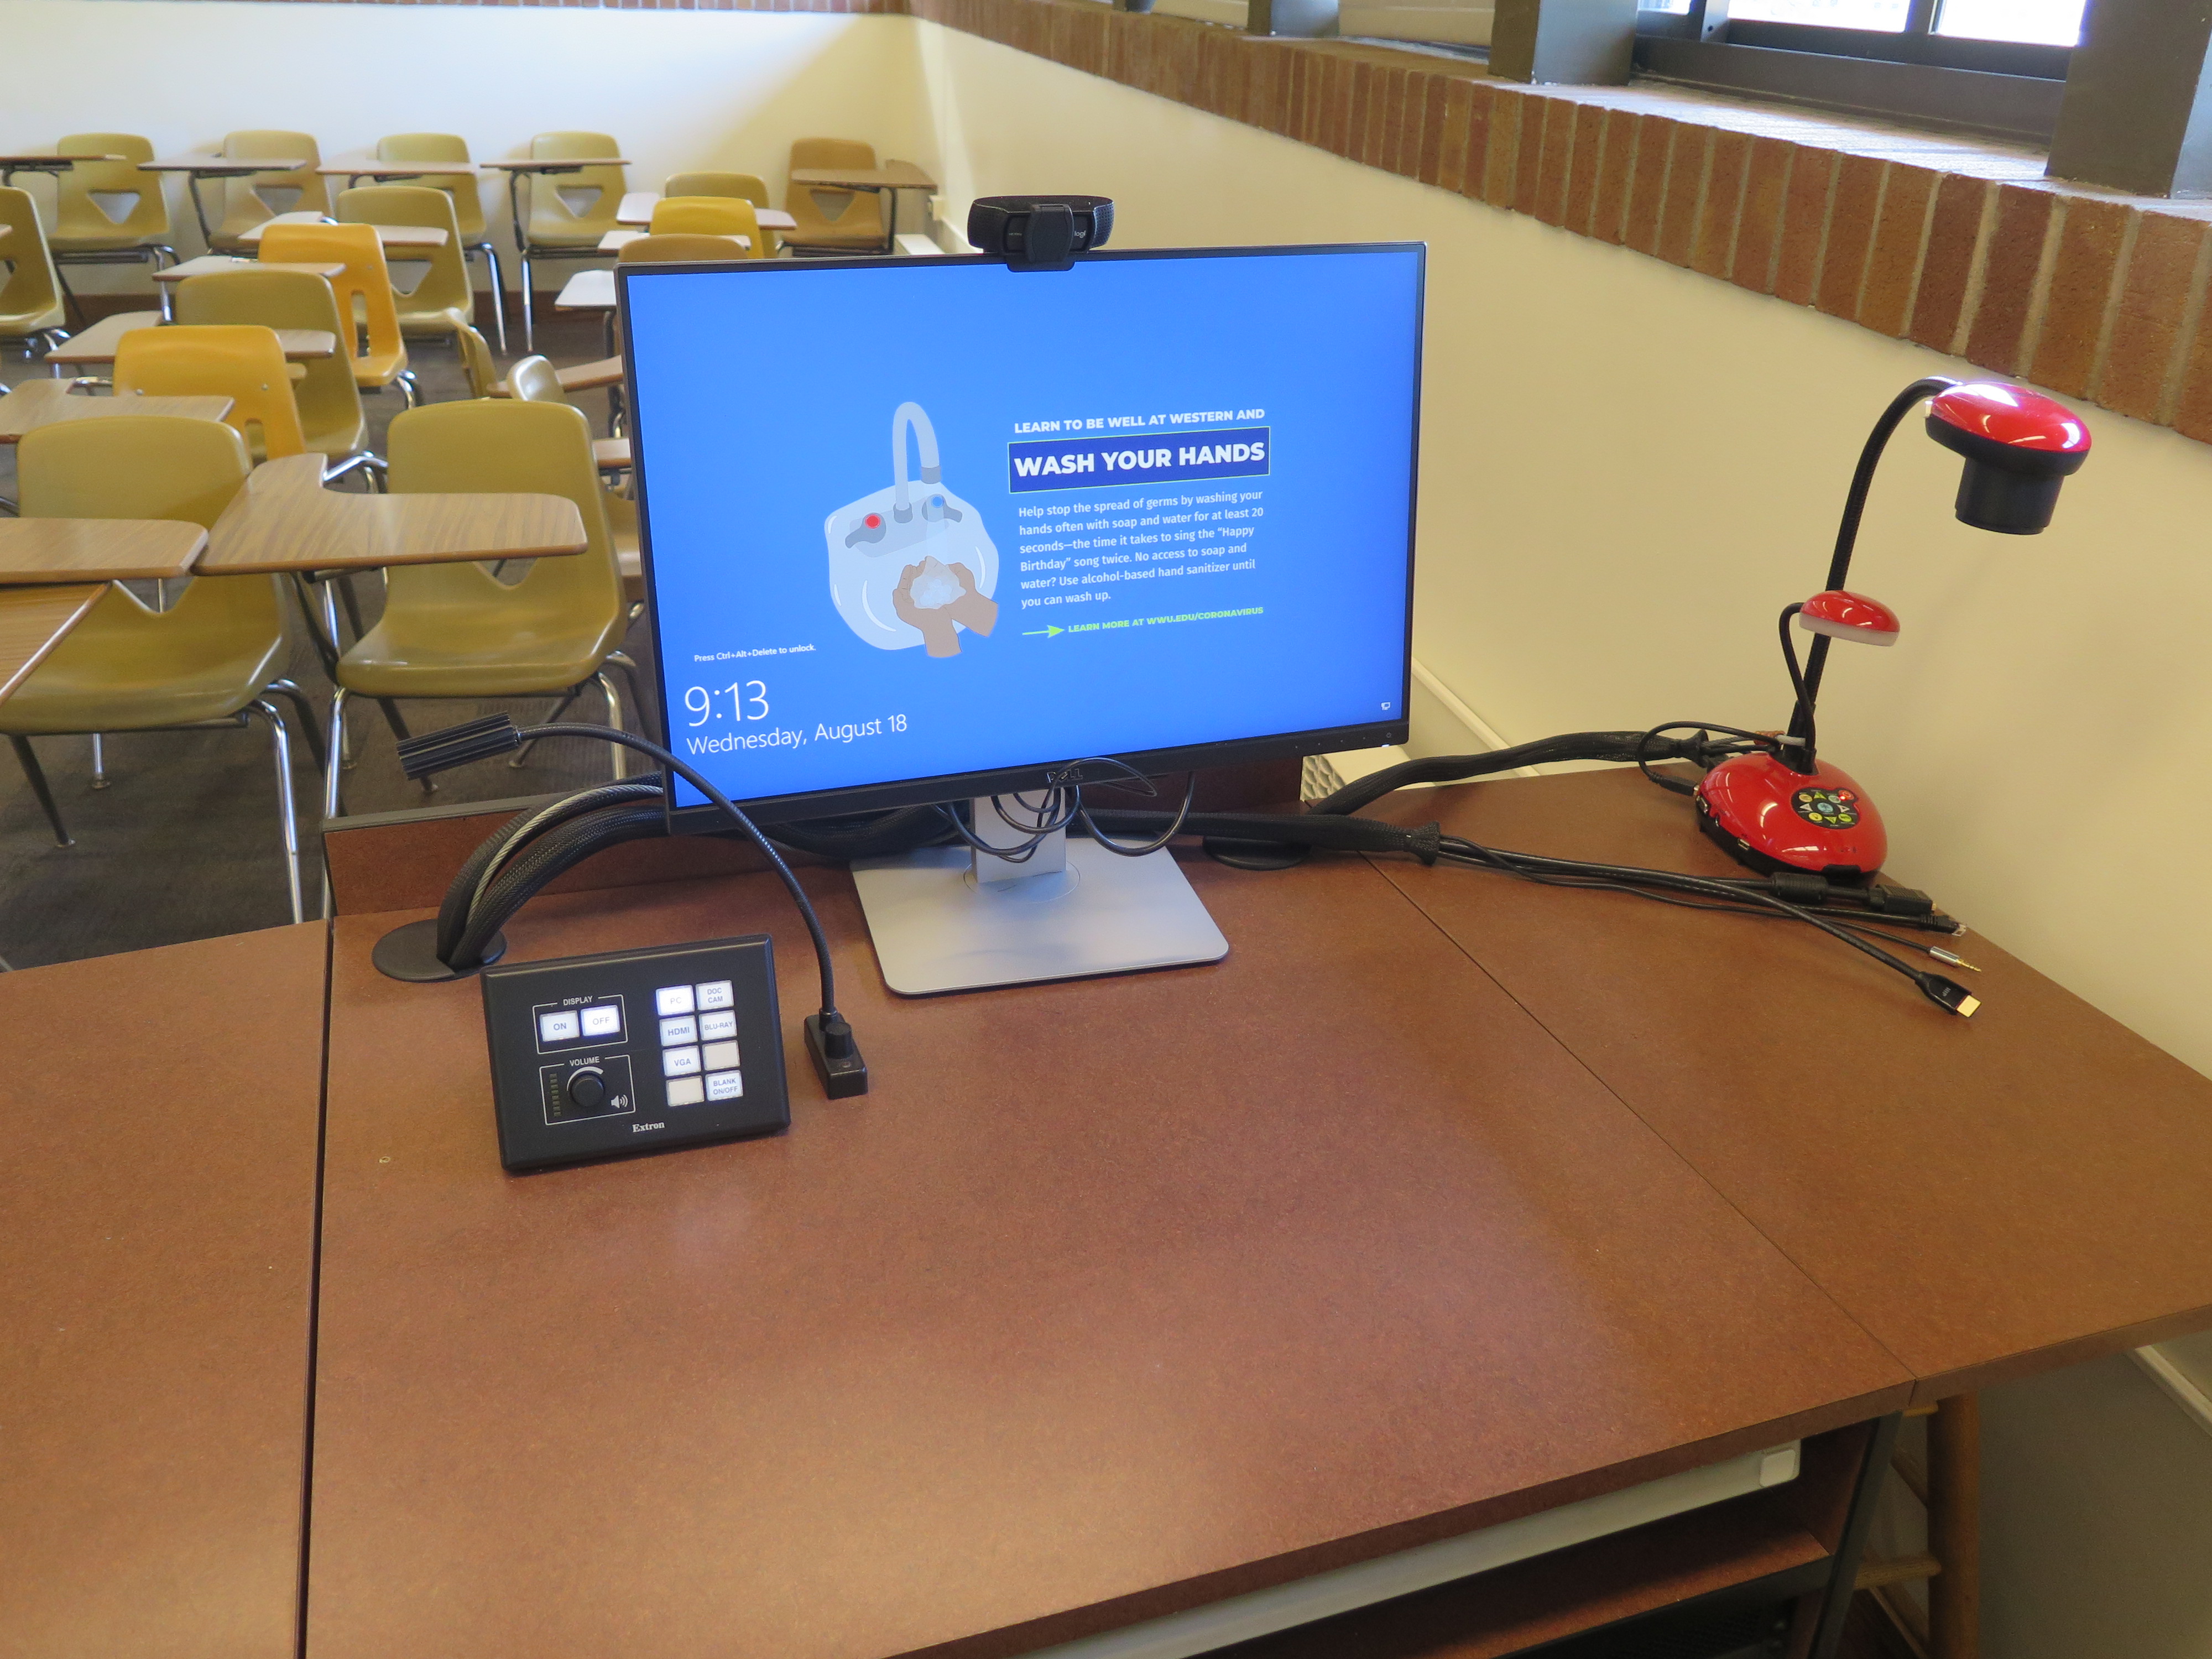 Top of the podium has a Ladybug document camera, Dell PC Monitor, AV push button Switcher, and a Logitech Webcam